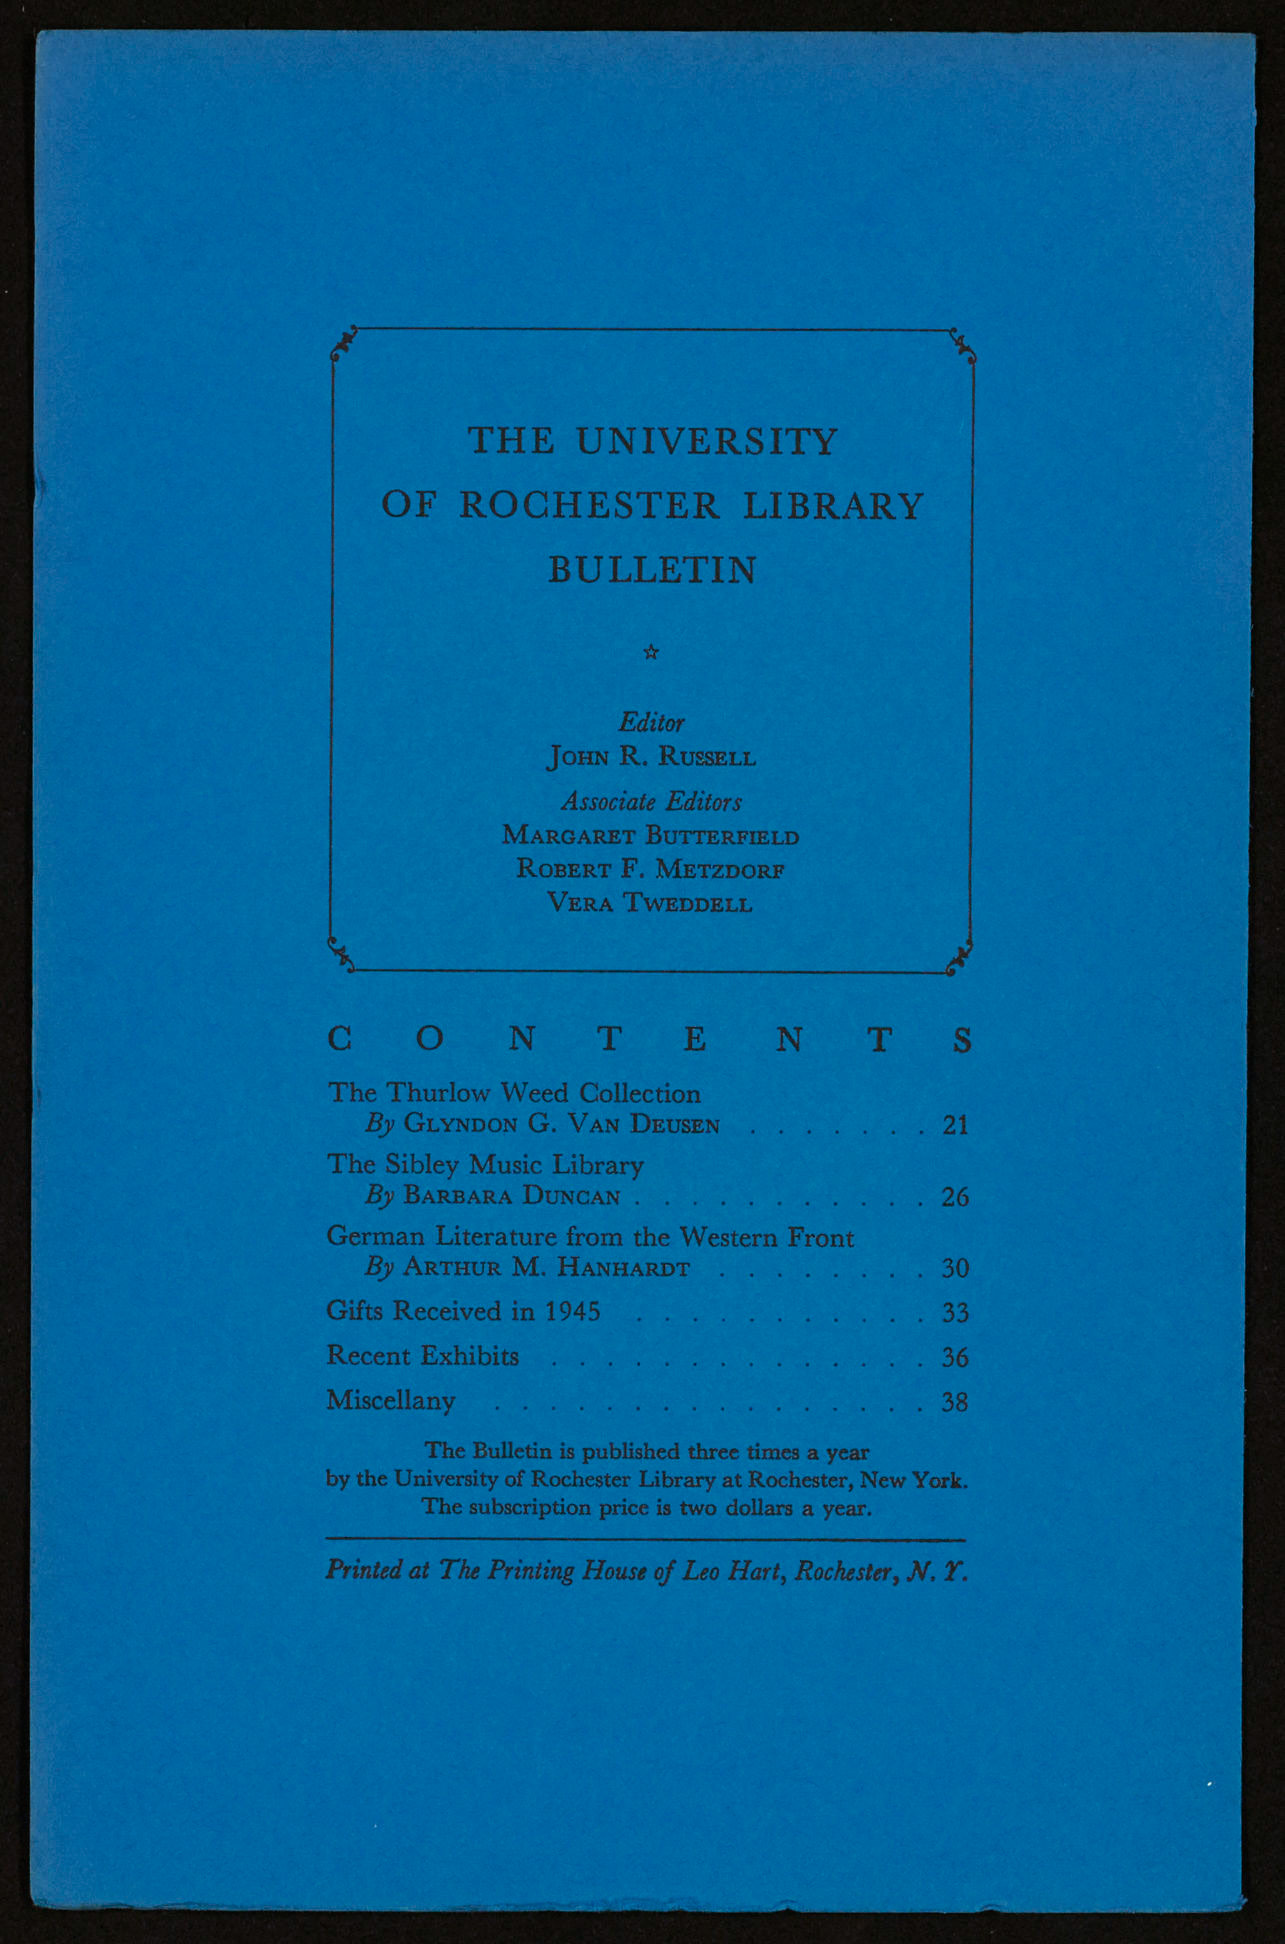 UR Library Bulletin, June 1946, table of contents